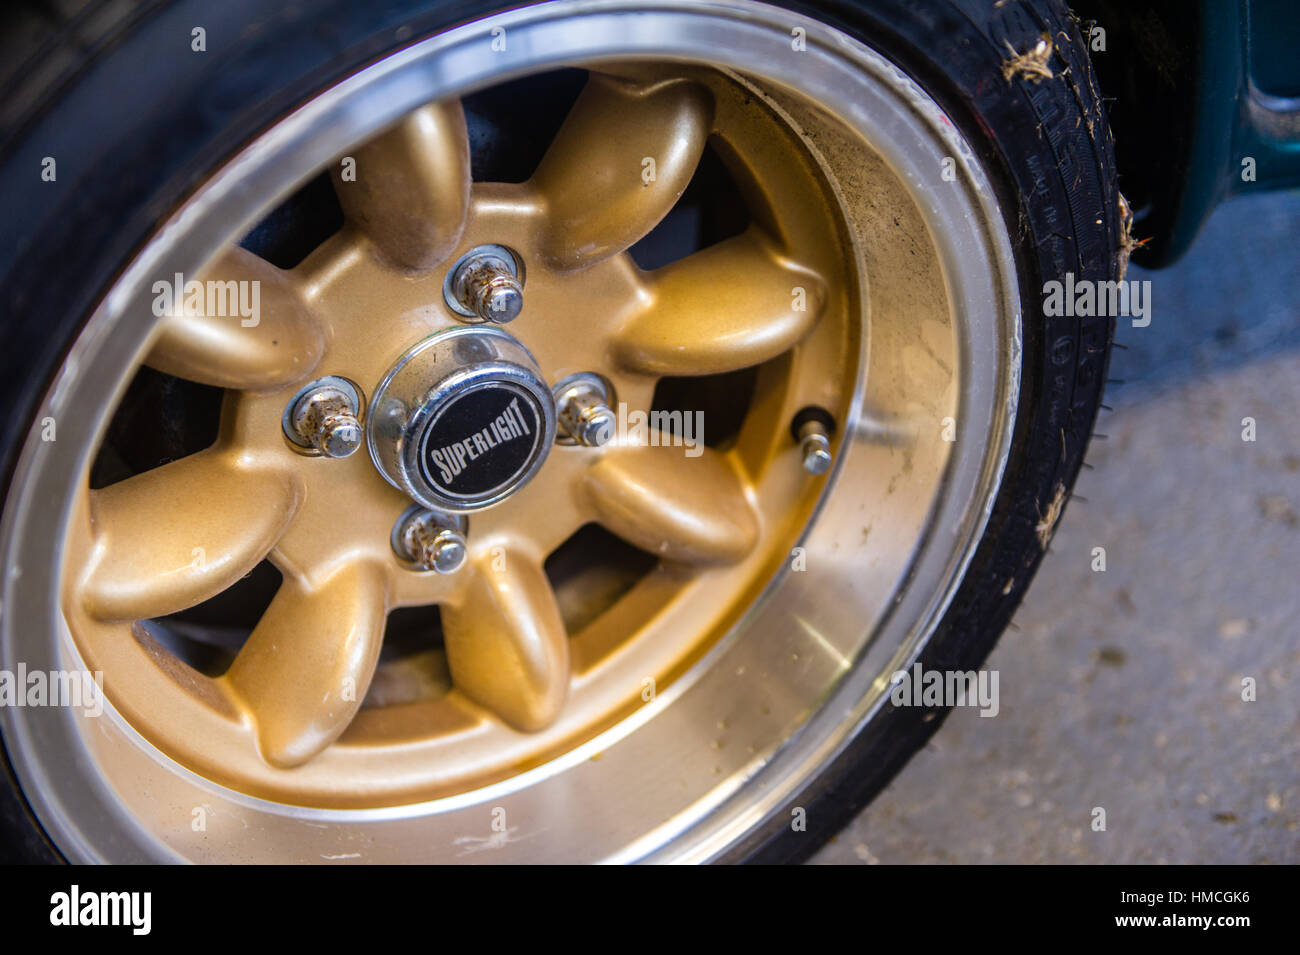 Alloy wheel with tyre on a classic Austin Mini Cooper in a domestic garage. Stock Photo